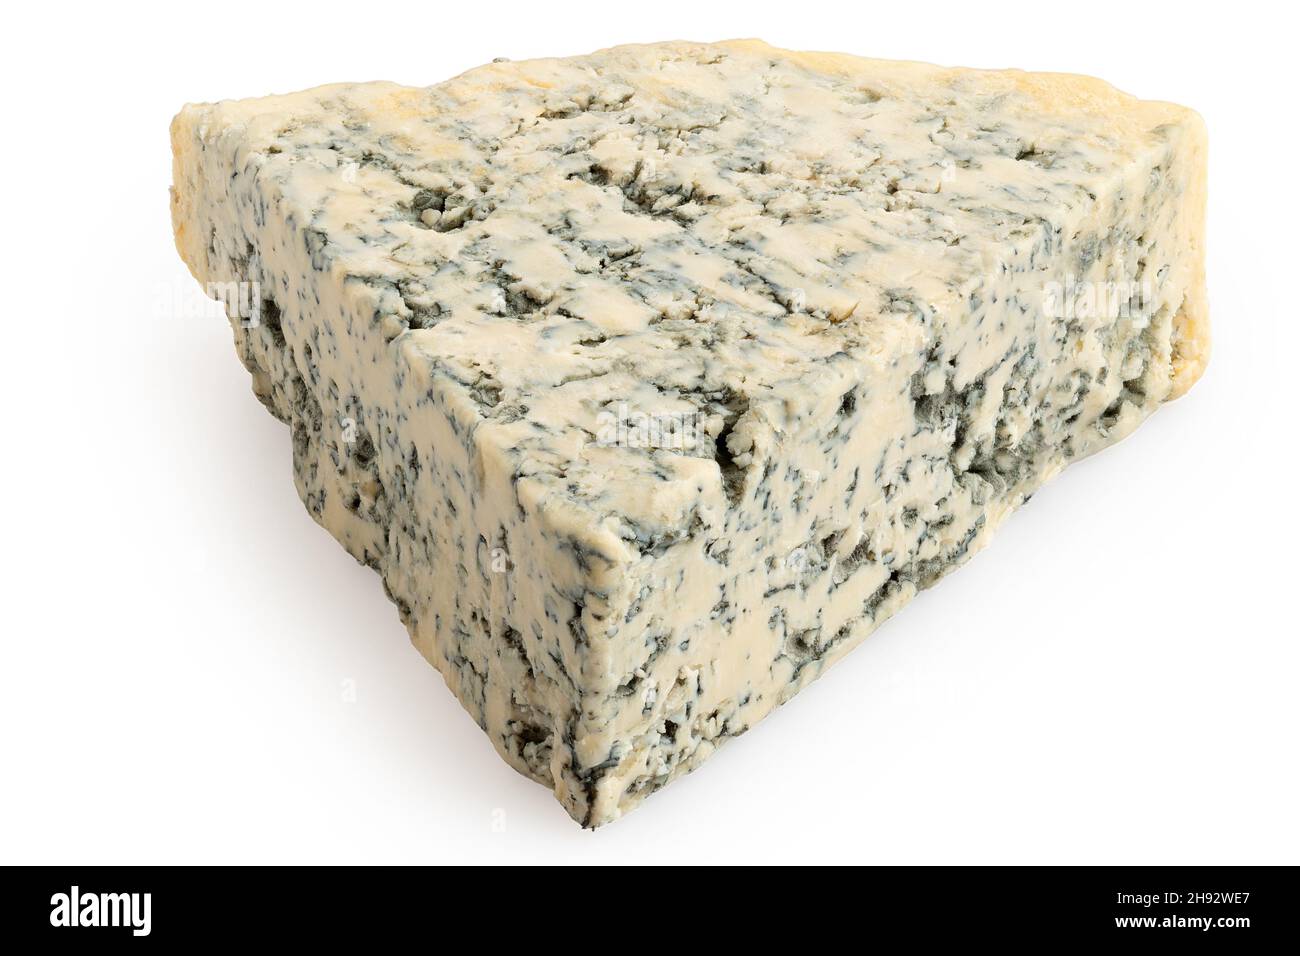 Blue cheese wedge isolated on white. Stock Photo